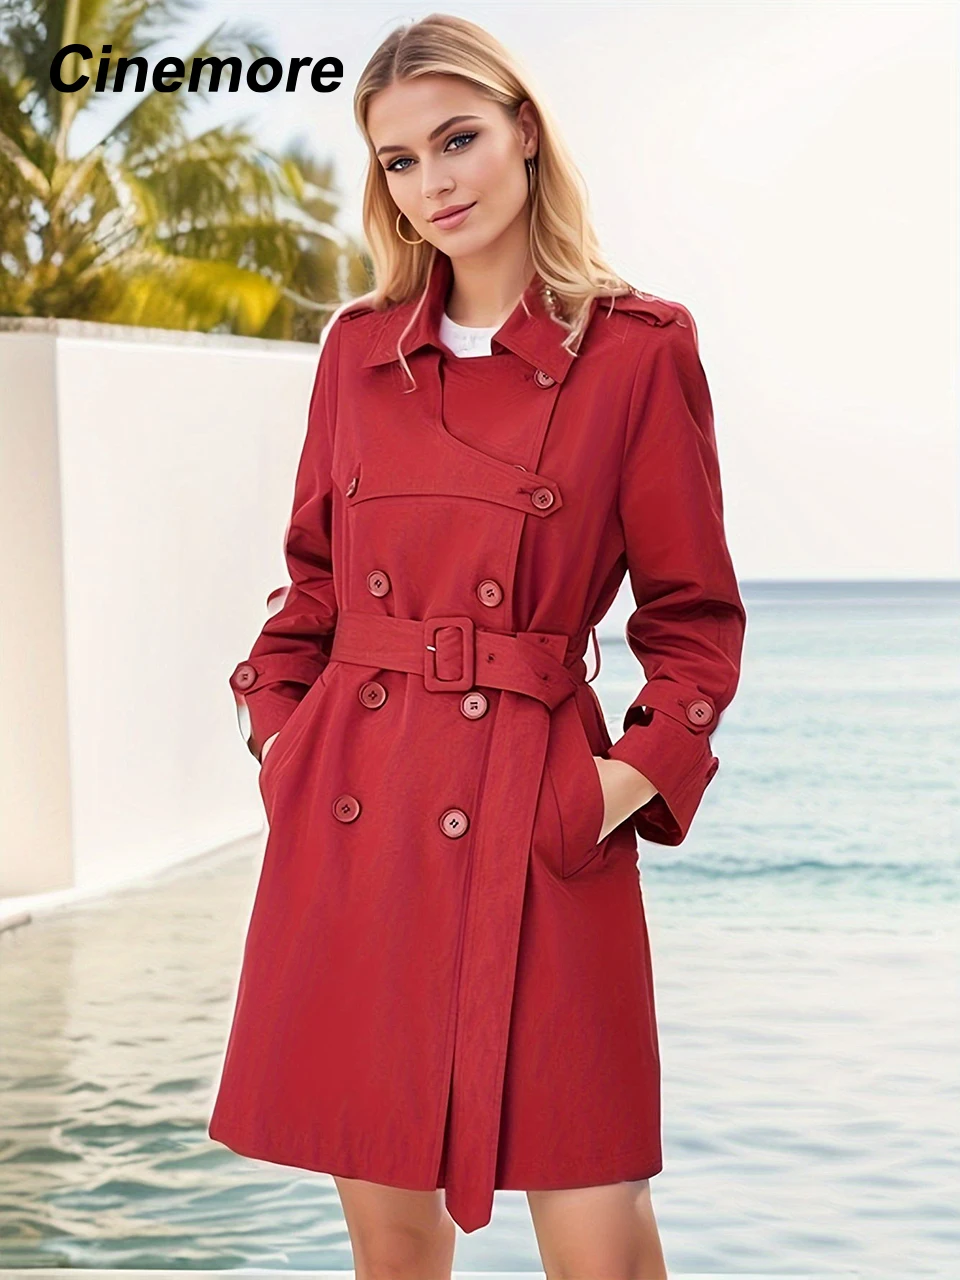 

Cinemore Spring Long Trench Coat for Women Casual Windbreaker Jacket Double Breasted Lapel Belted Windproof Female Overcoat